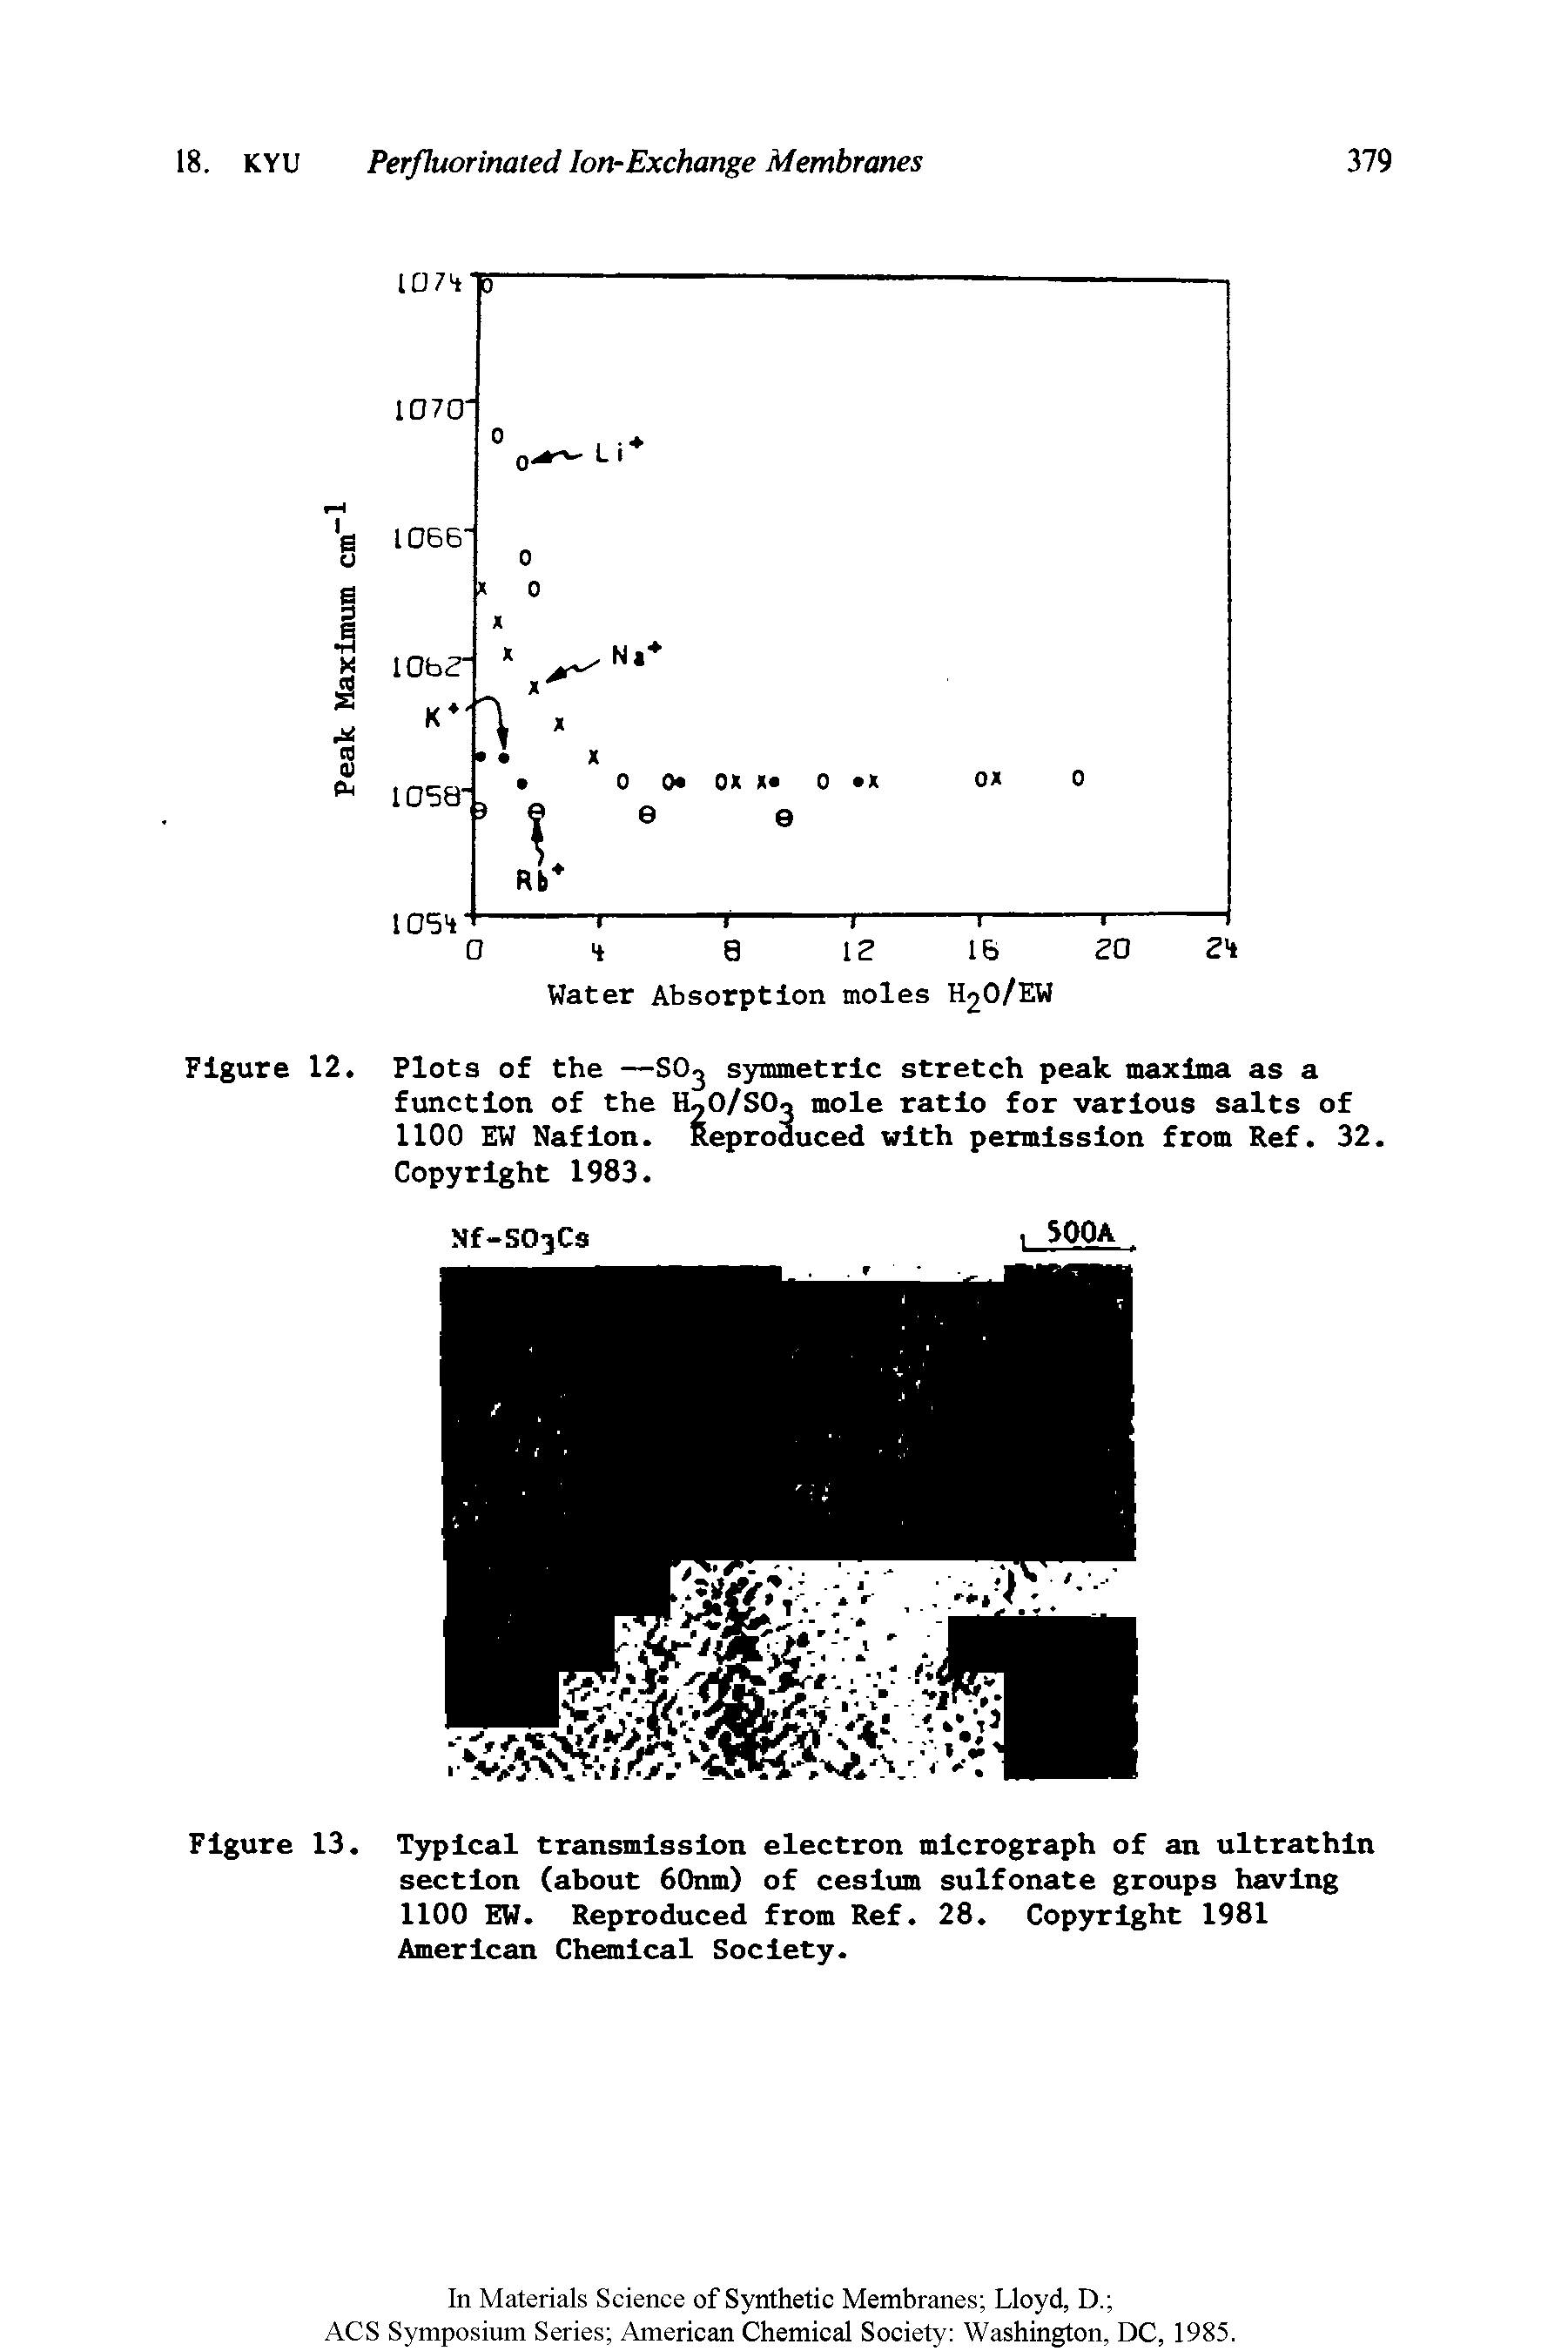 Figure 13. Typical transmission electron micrograph of an ultrathin section (about 60nm) of cesium sulfonate groups having 1100 EW. Reproduced from Ref. 28. Copyright 1981 American Chemical Society.